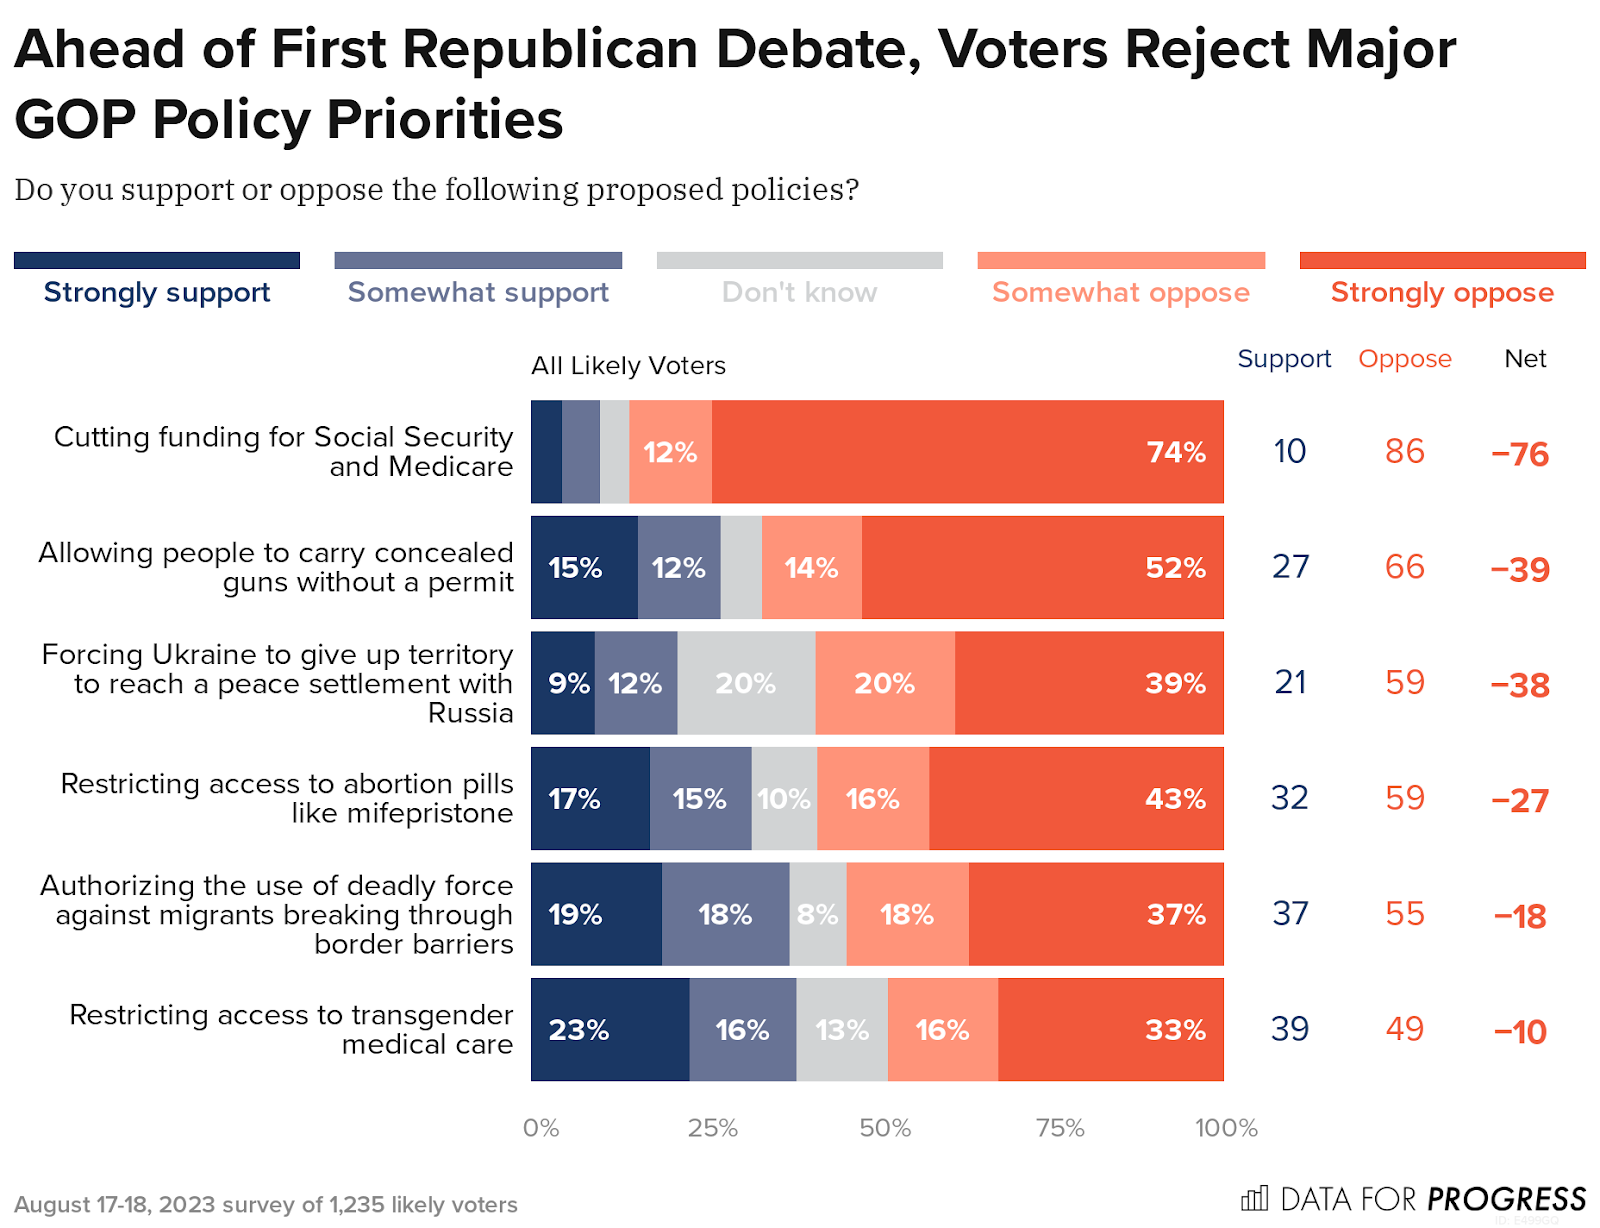 Ahead of first Republican debate, voters reject major GOP policy proposals 